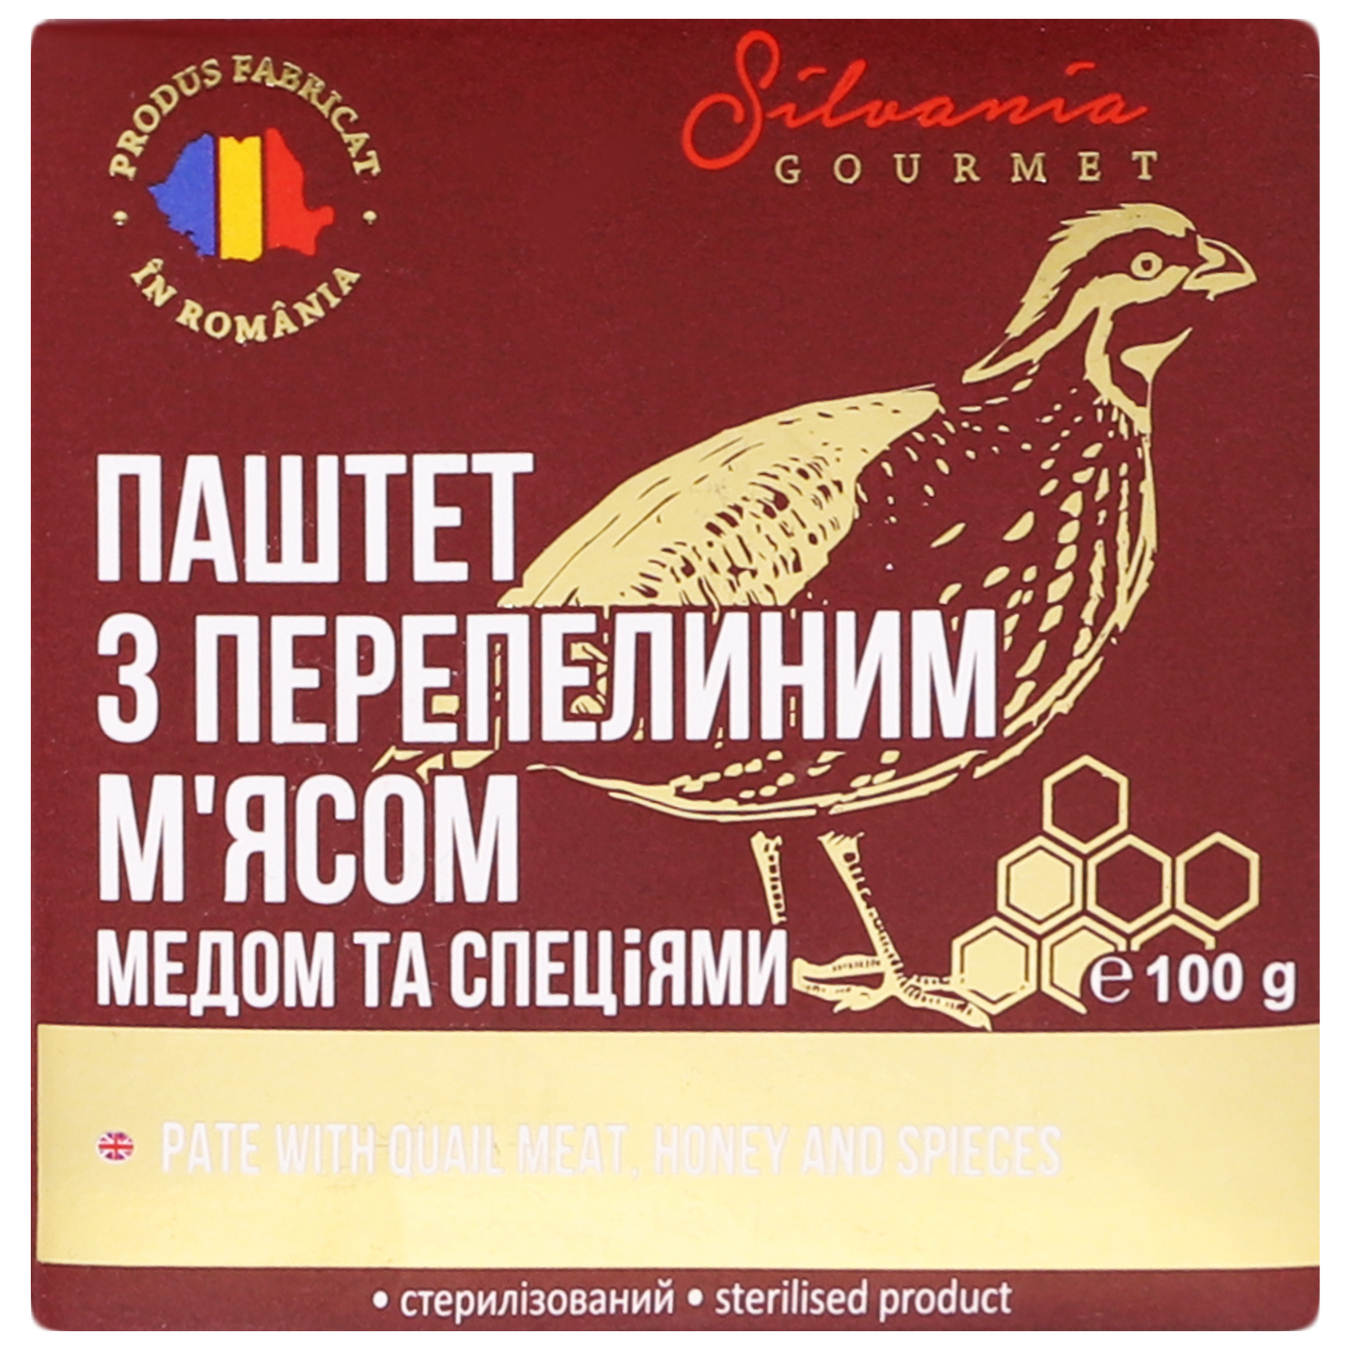 Silvania pate with quail meat, honey and spices 100g